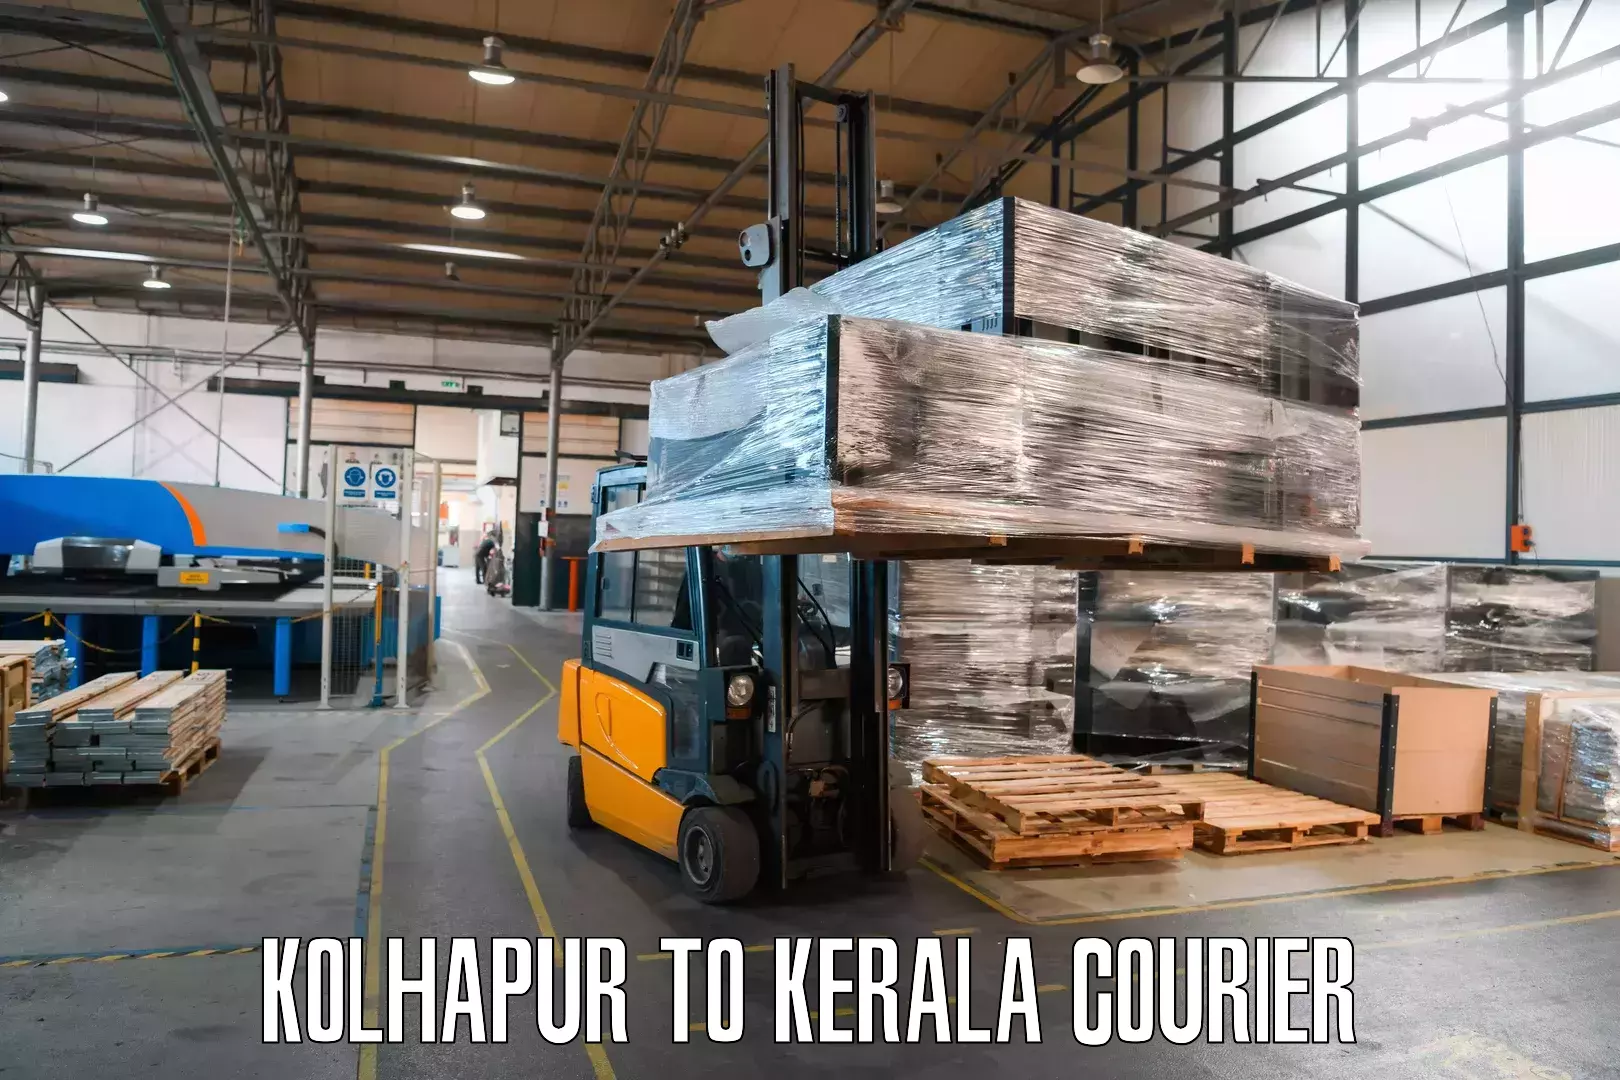 On-call courier service Kolhapur to Thrissur